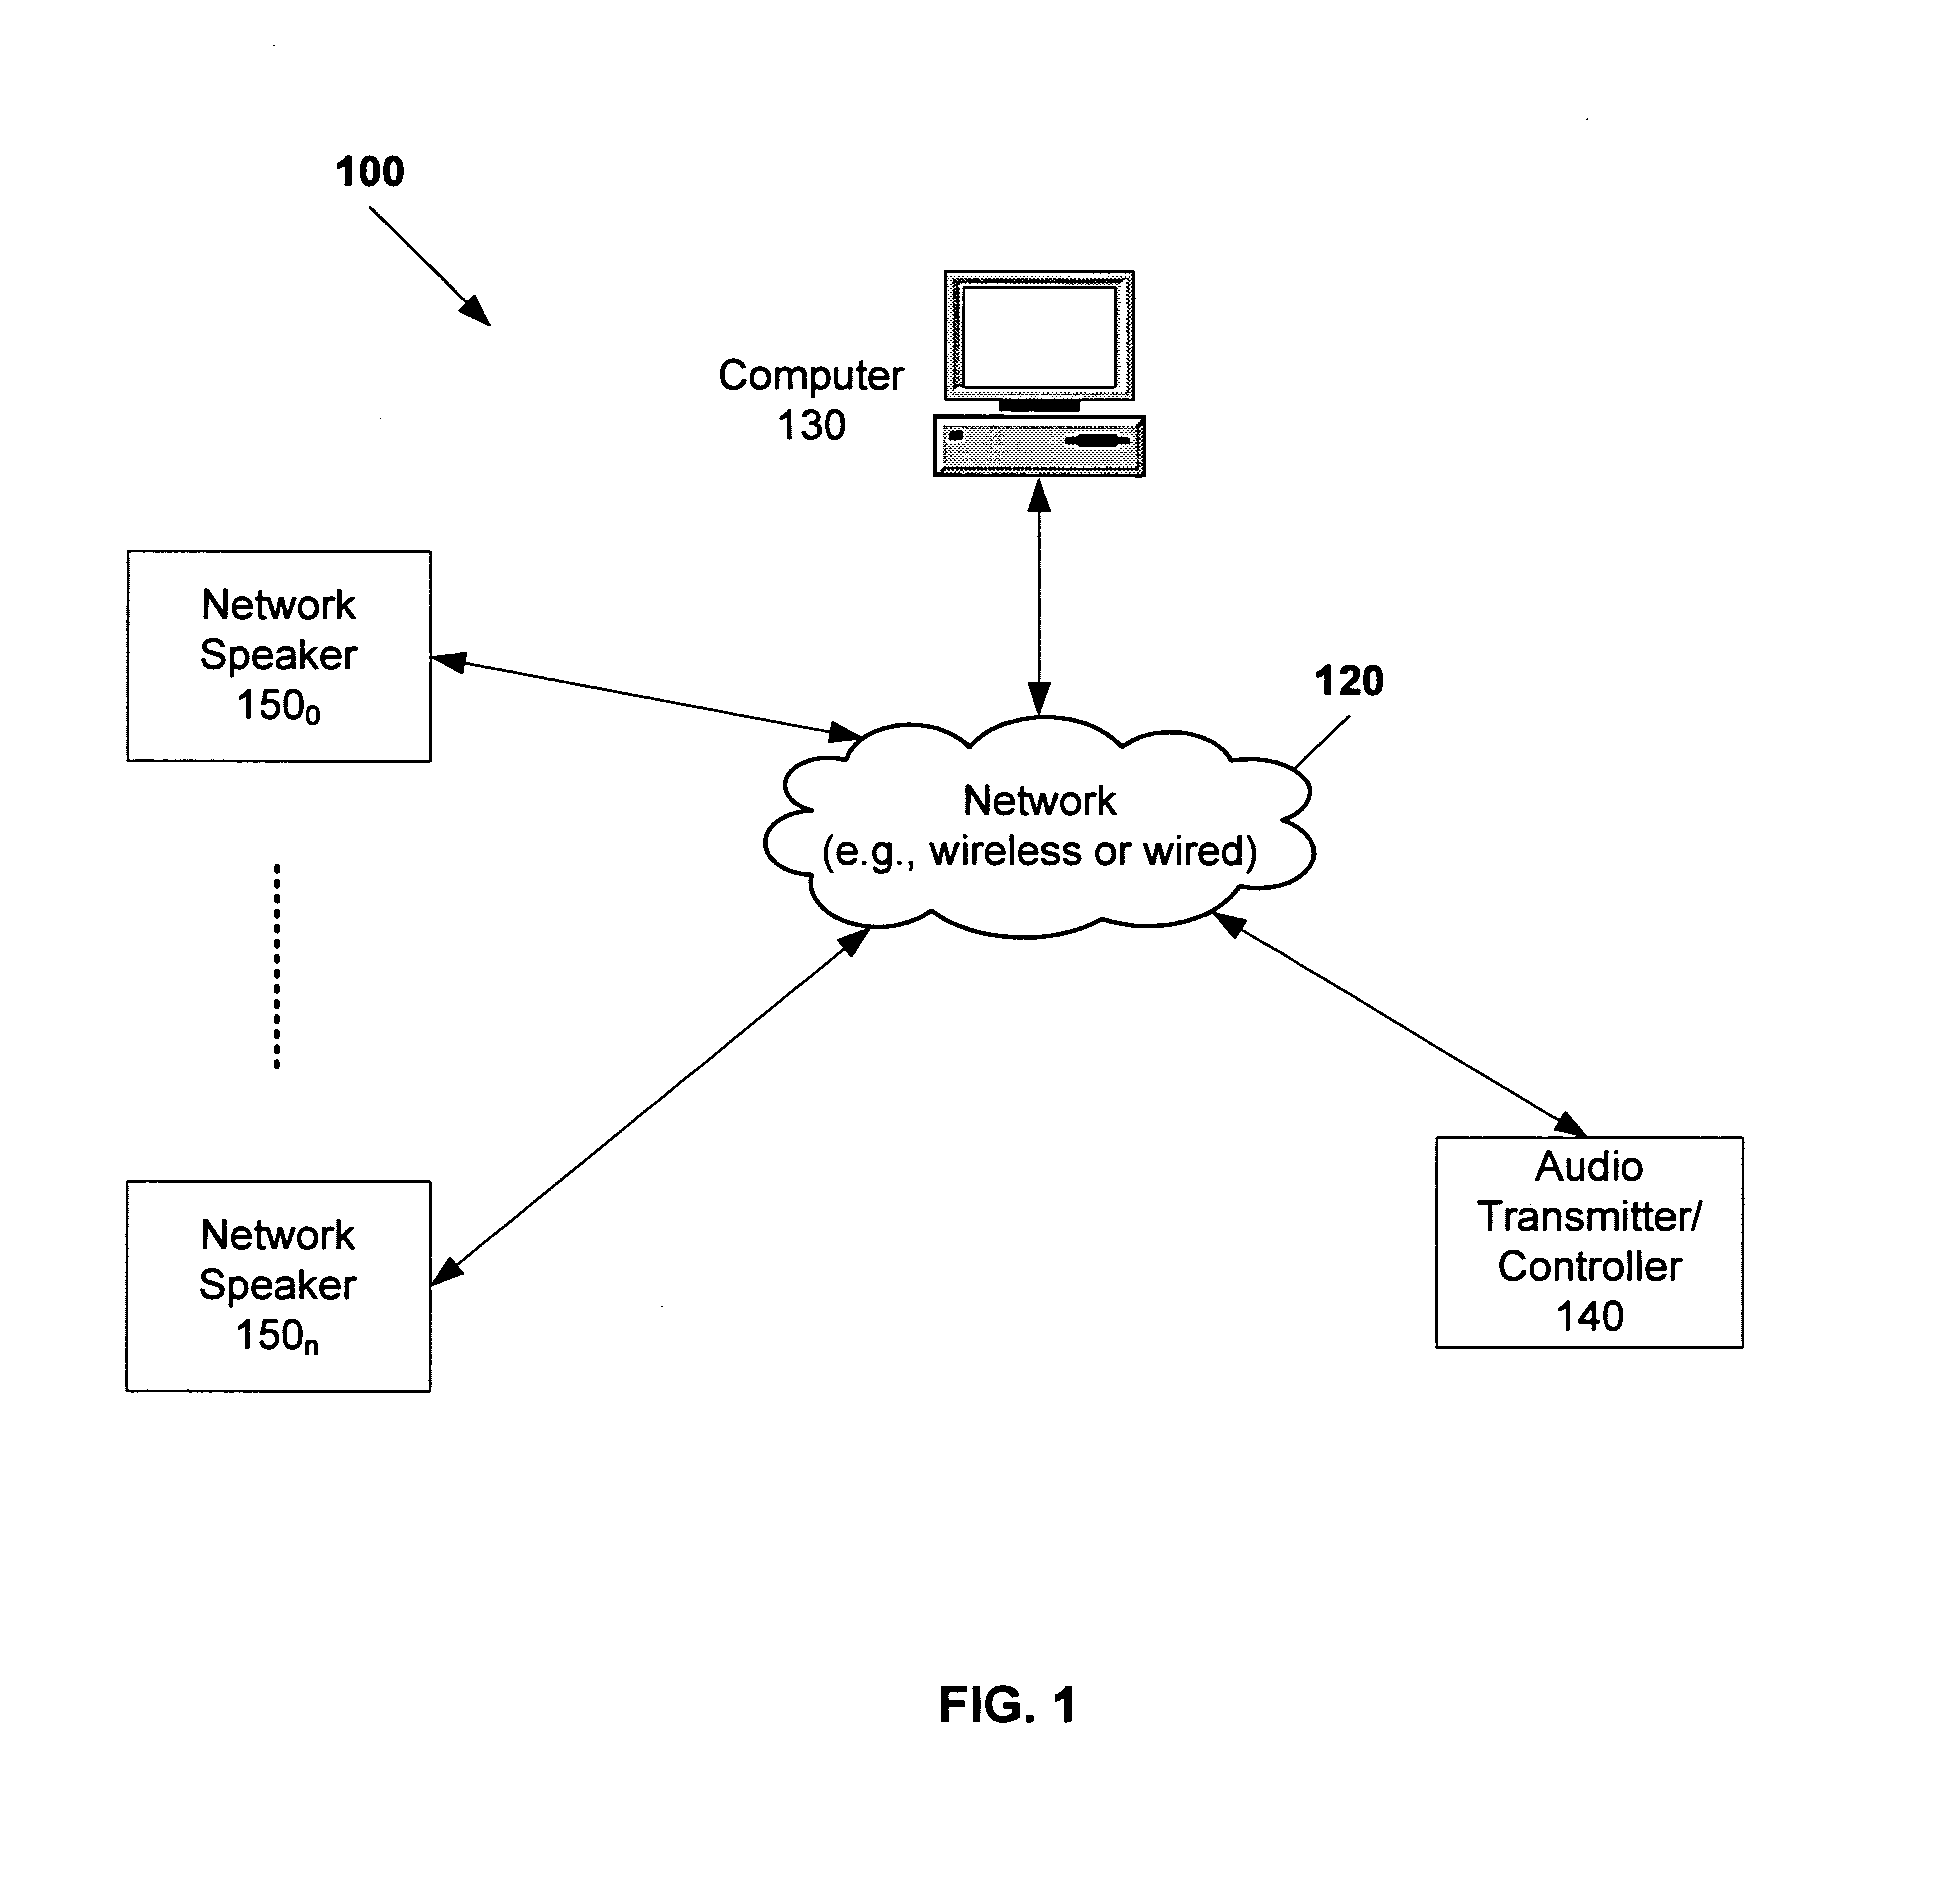 Apparatus and method to synchronize multimedia playback over a network using out-of-band signaling